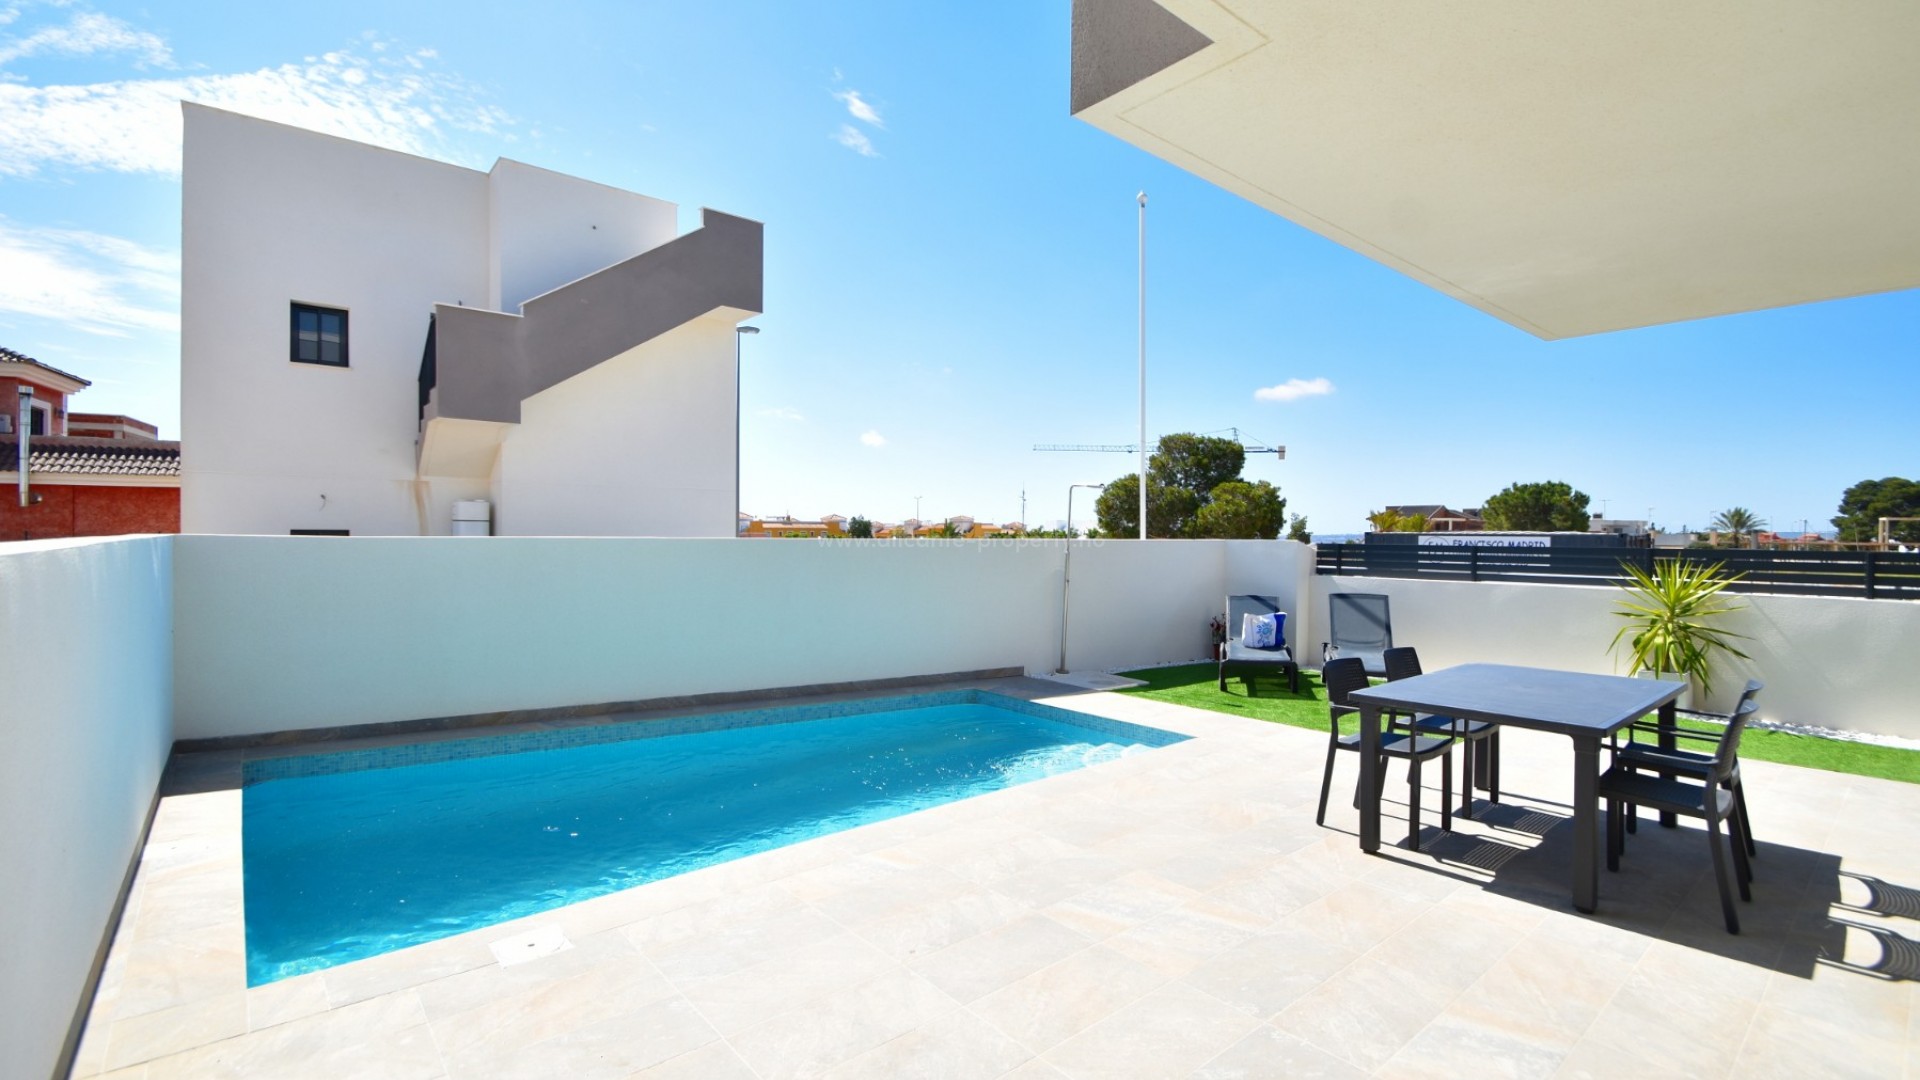 Villa in Los Montesinos, Alicante, the house has 104.7 m2, 3 bedrooms, 2 bathrooms, terrace of 30 m2, 30 minutes by car from Alicante airport, 10 min to the beach.